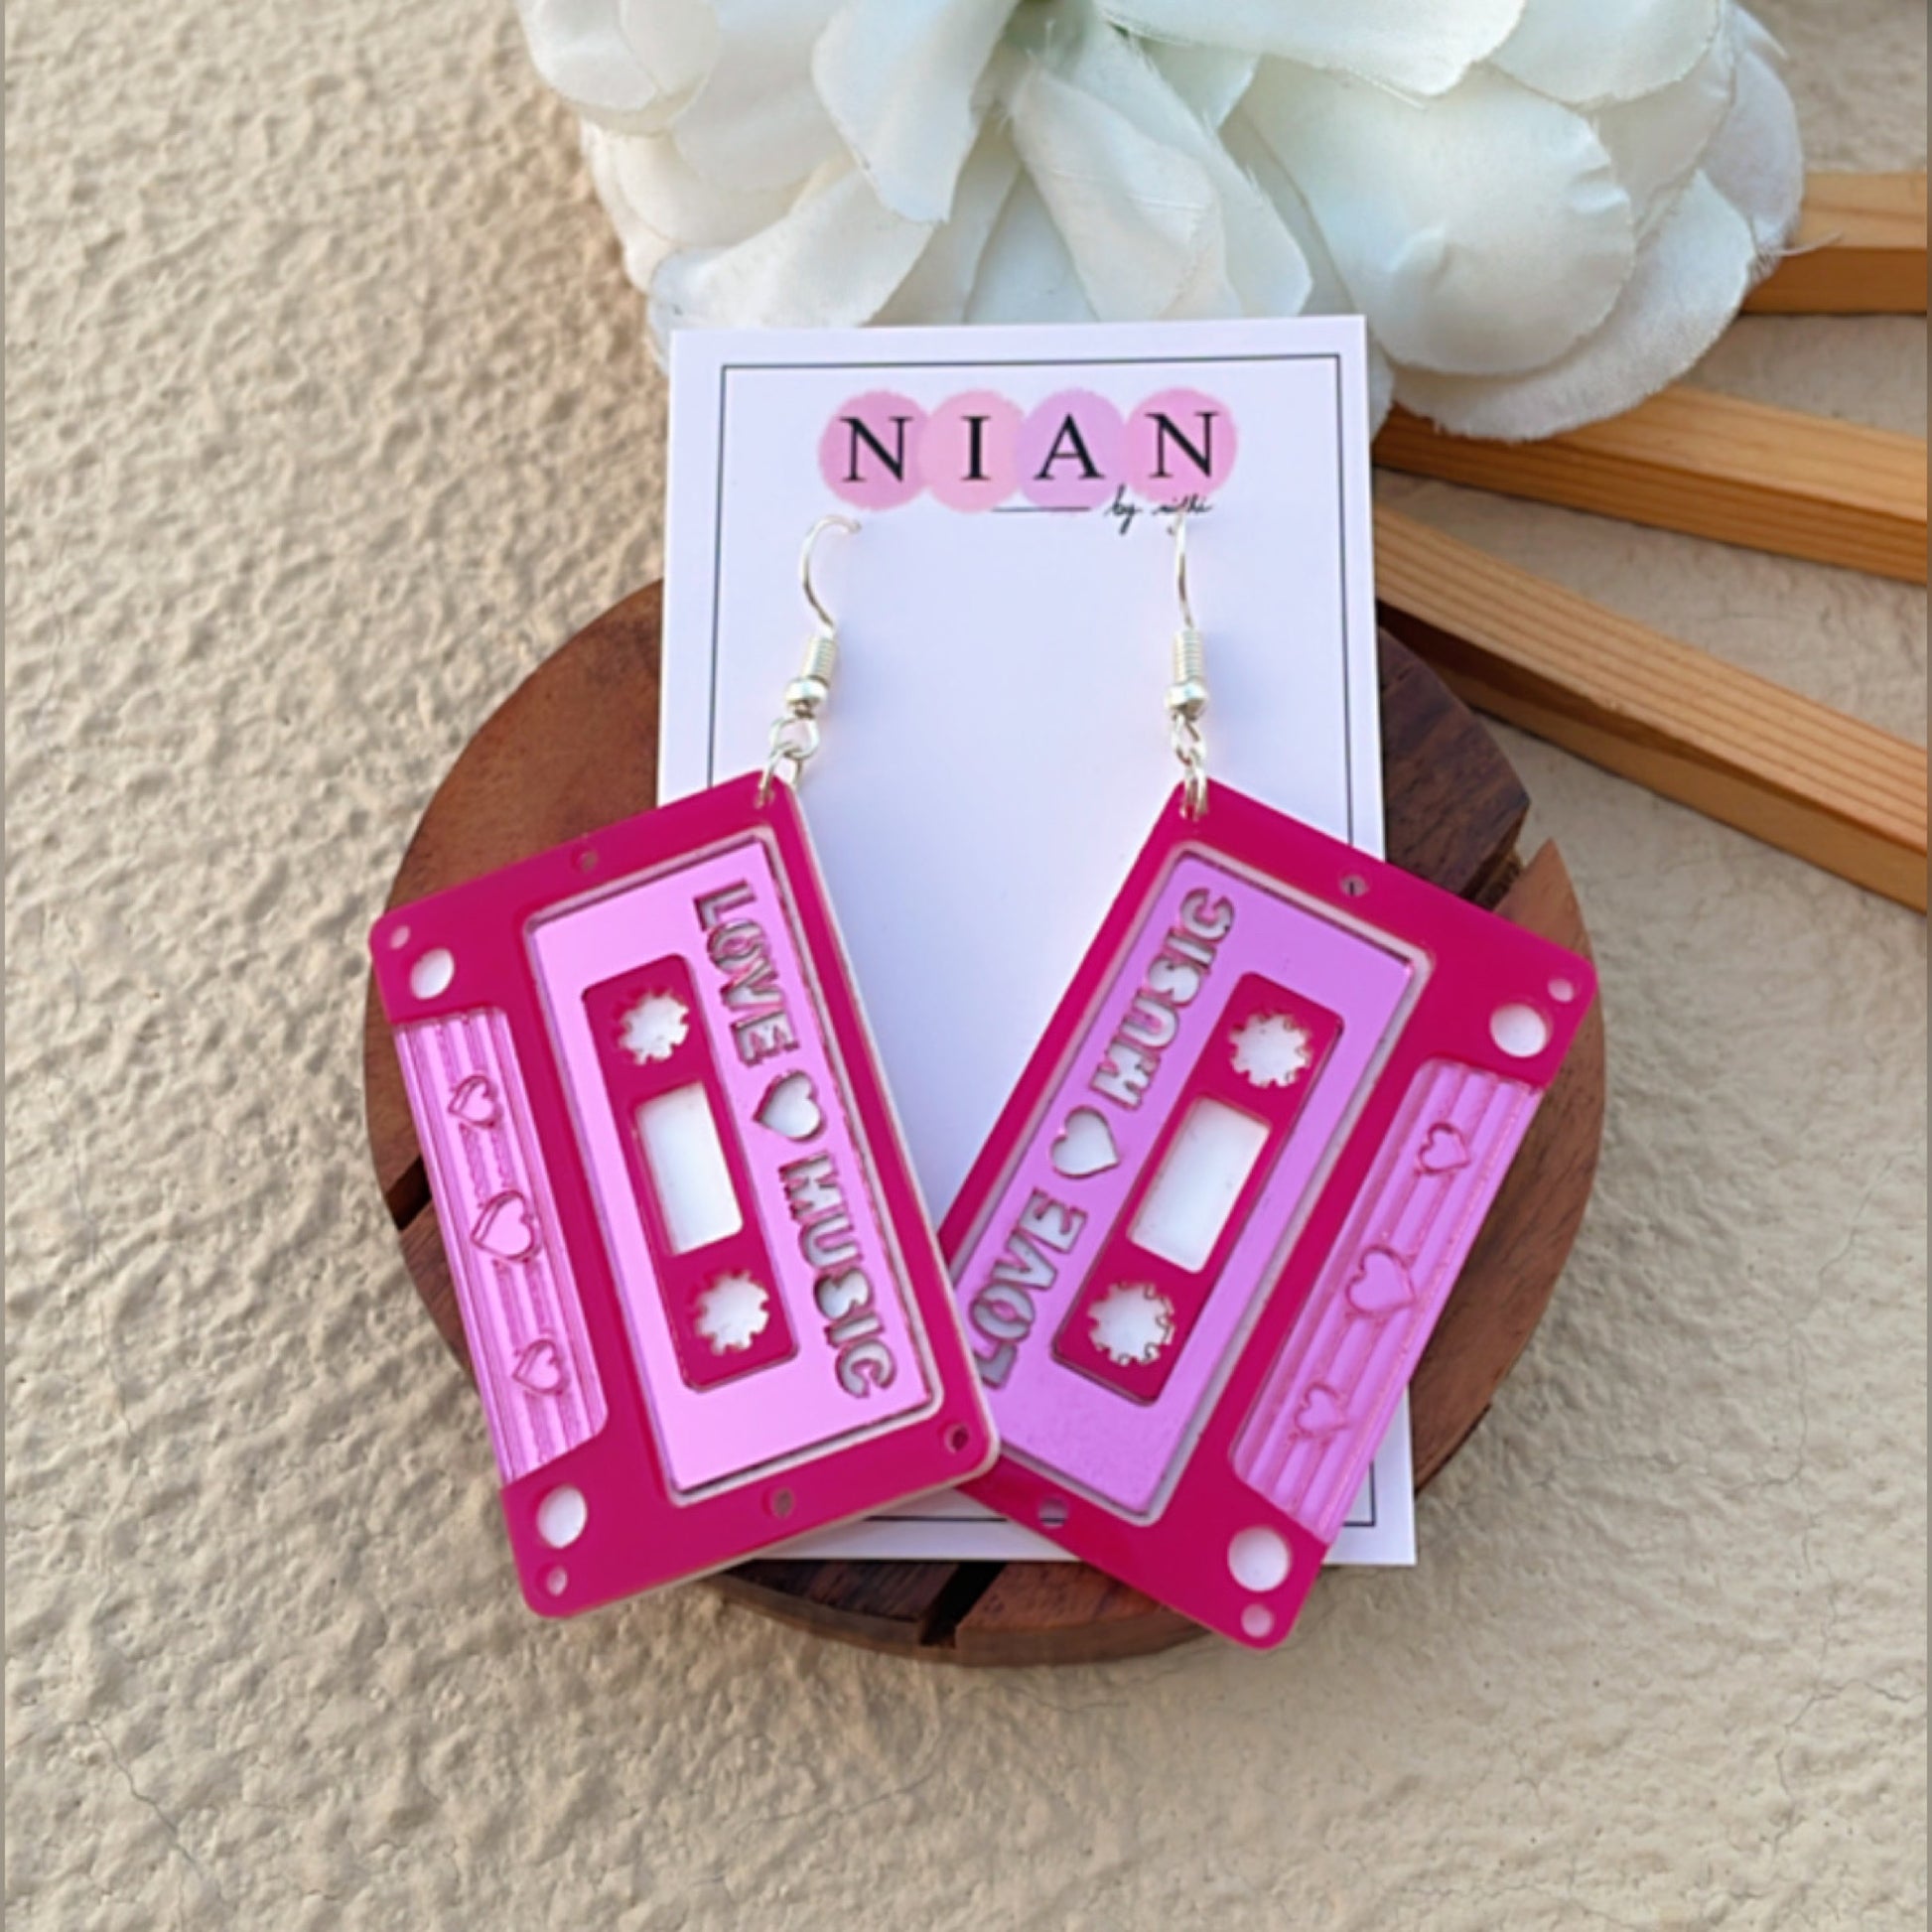 Love Cassette Earrings - Glossy Pink and White - Nian by Nidhi - placed in a brown background